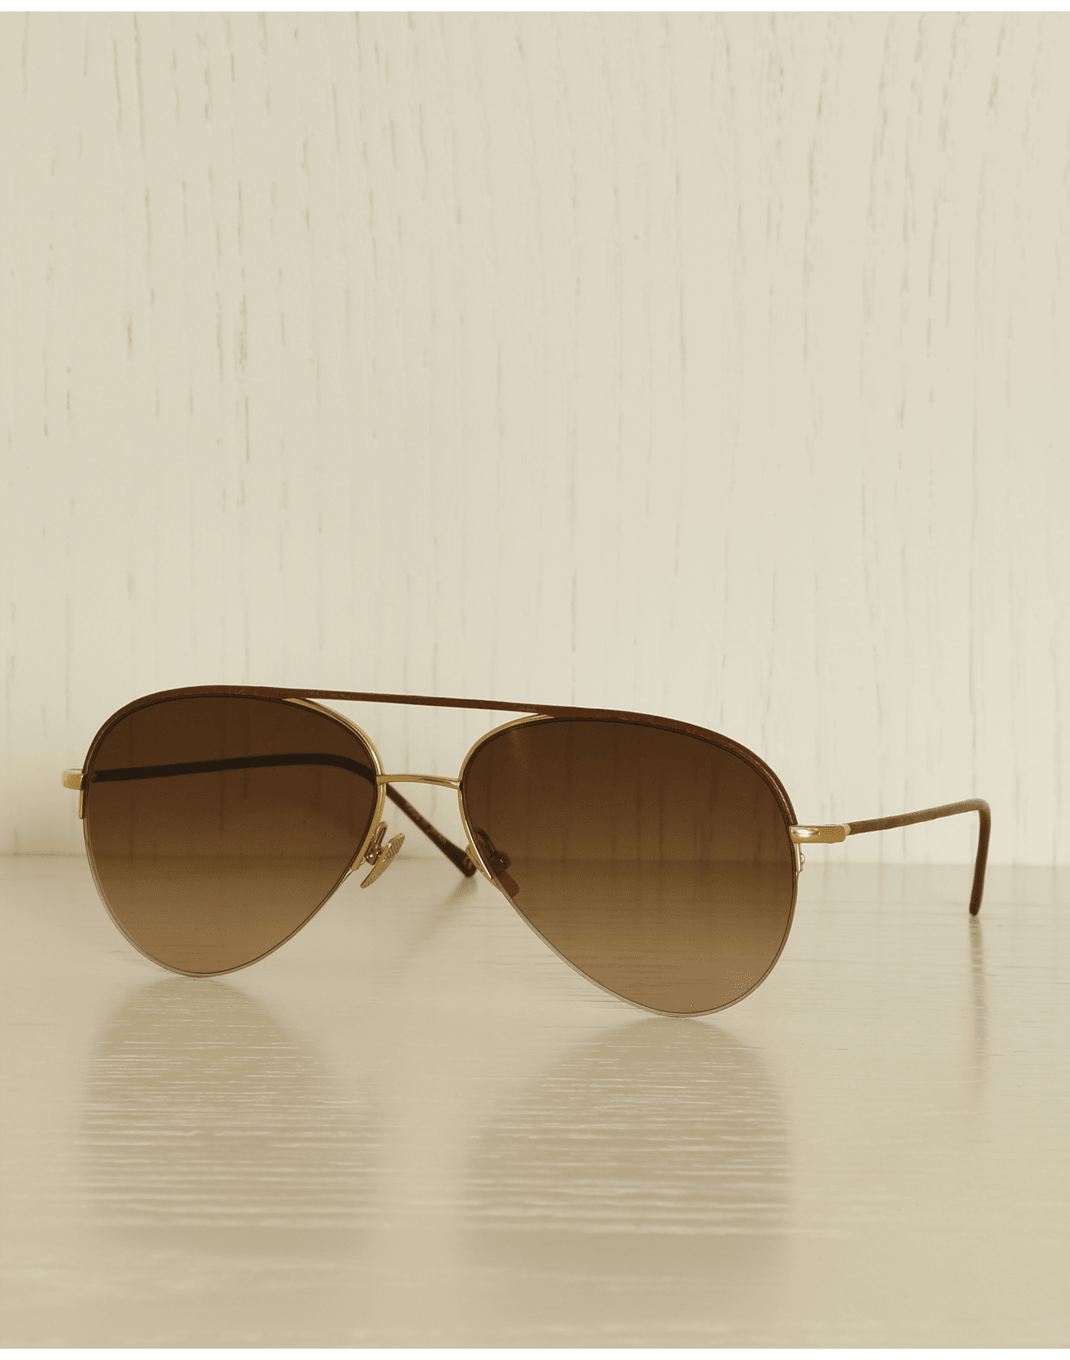 Ray Ban Aviator Light brown Gradient Remix Unboxing - YouTube